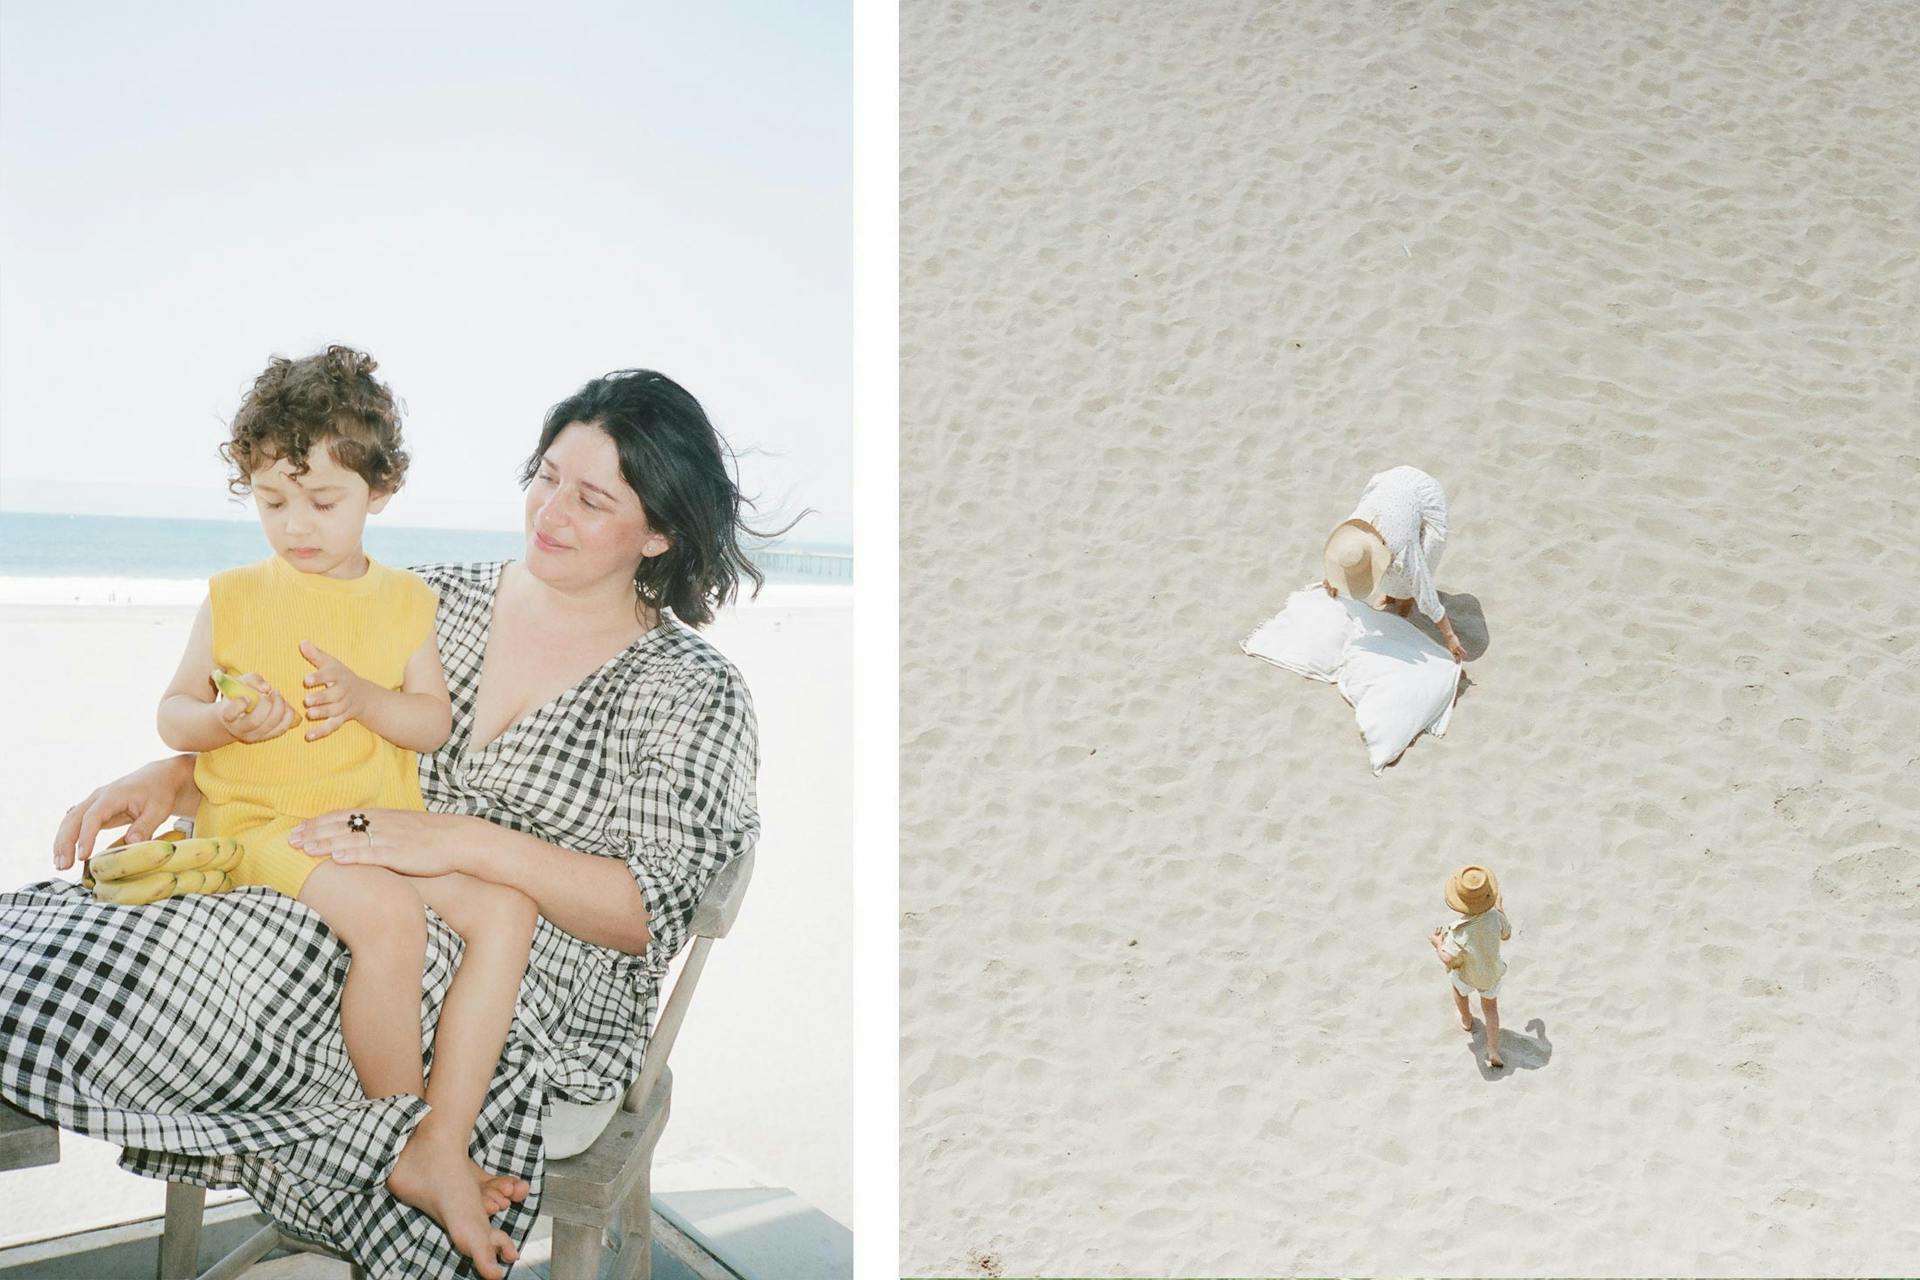 Two images. In the first, a woman sits on the beach with a child in her lap. The second shows two people in the sand.